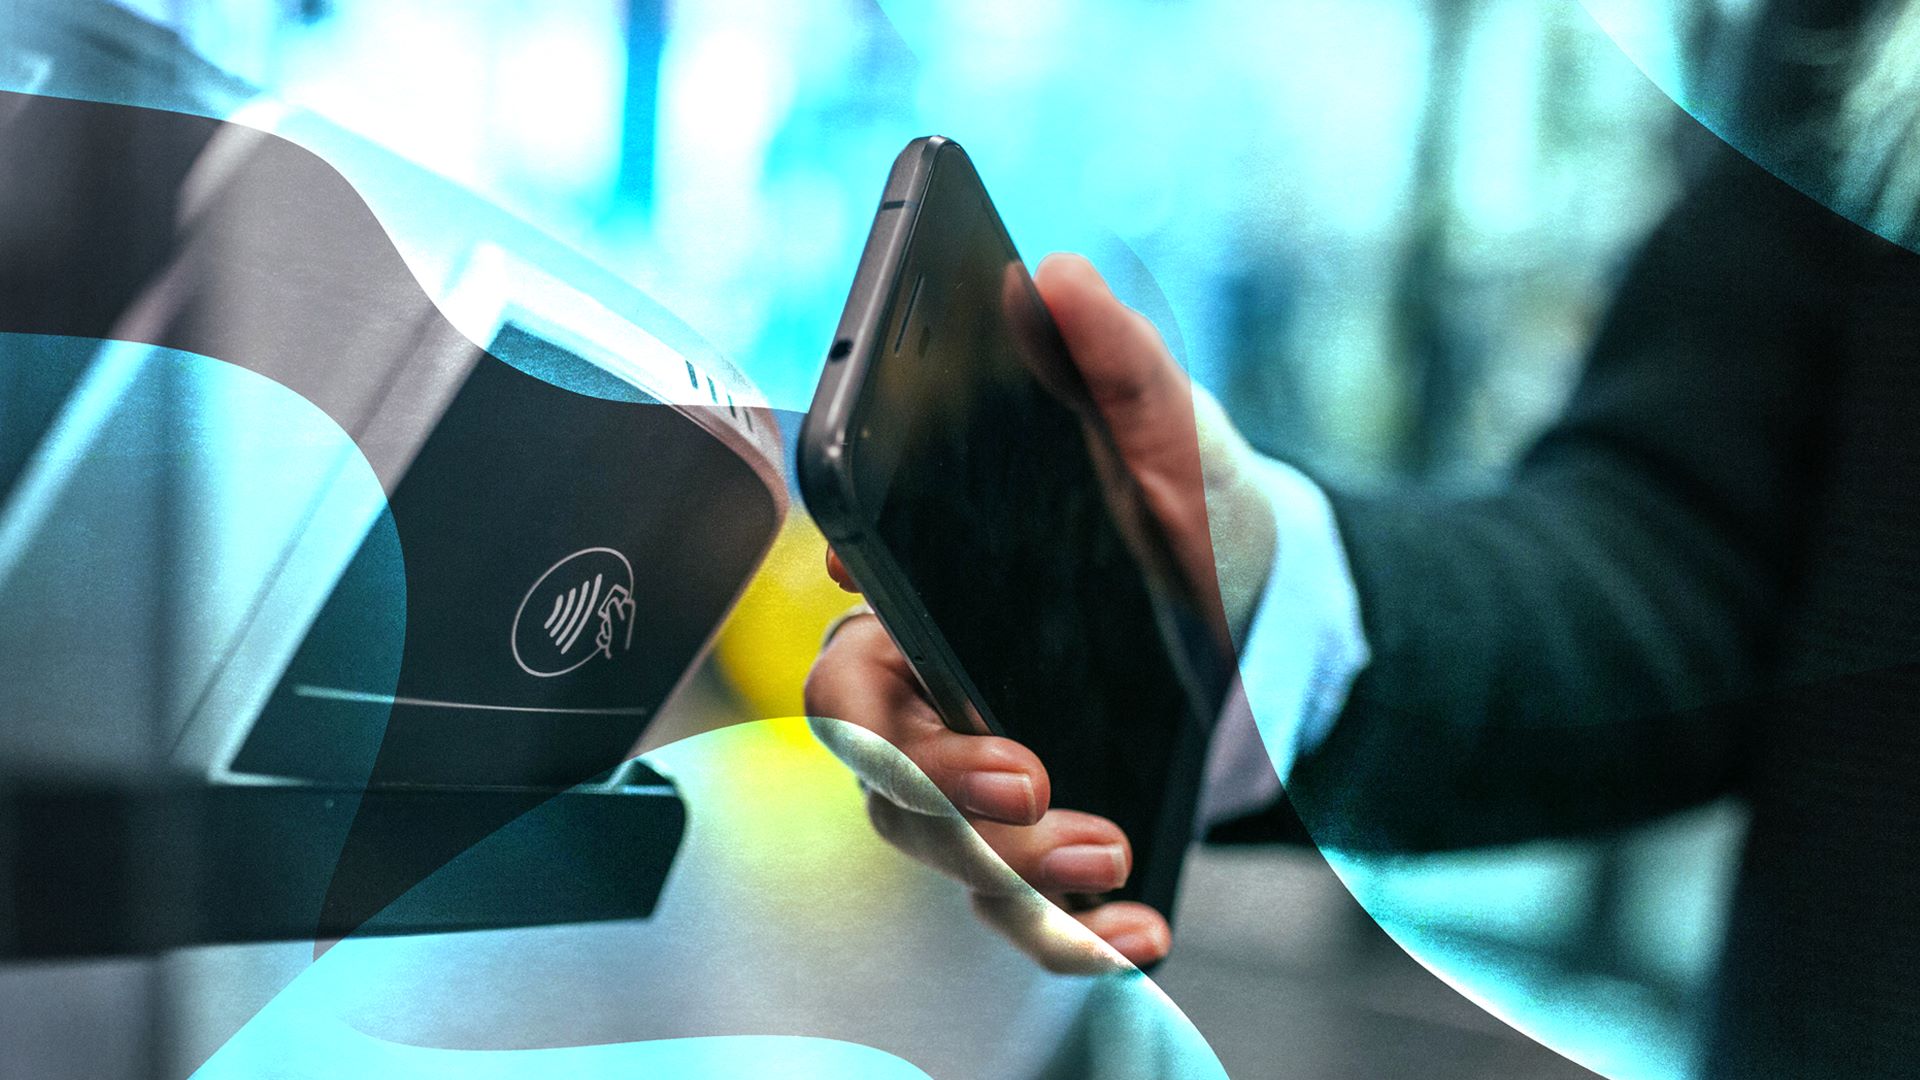 To tap or not to tap: Are NFC payments safer?